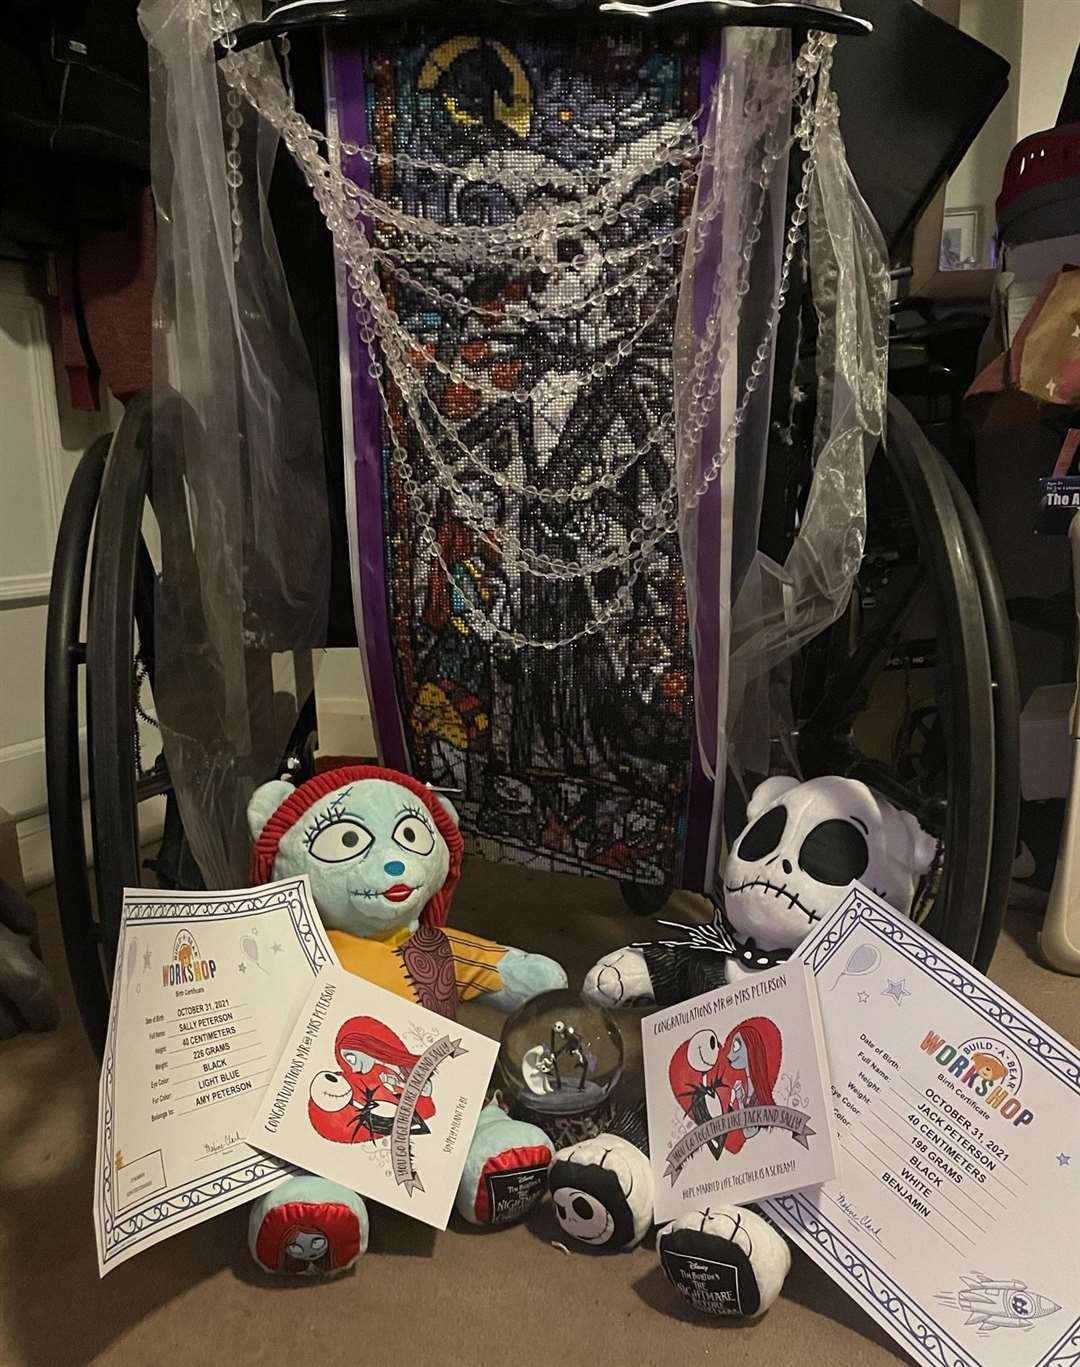 Amy Paterson decorated her wheelchair in a Halloween style for her wedding